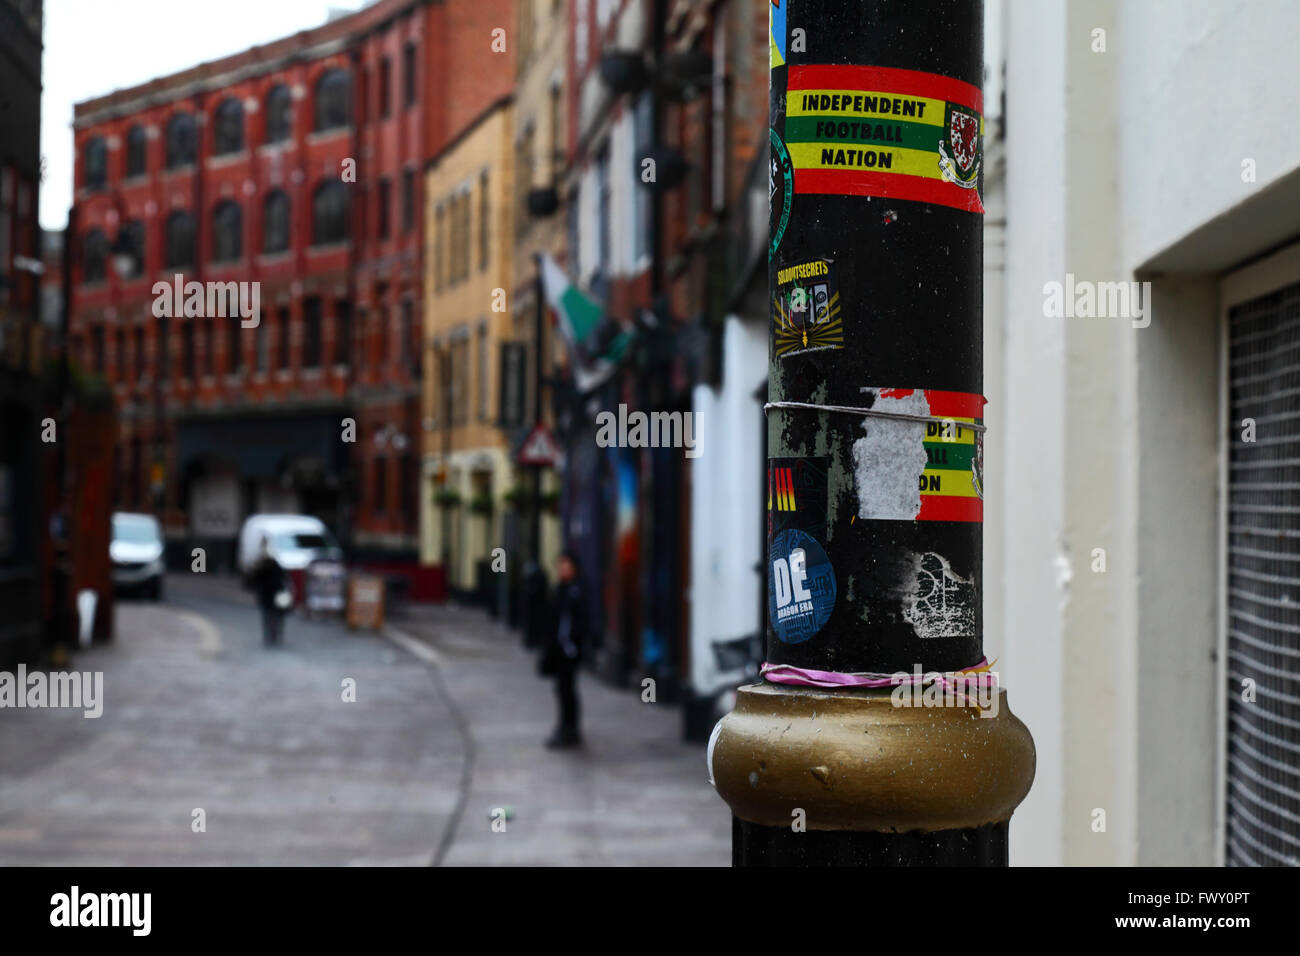 Independent football nation stickers on lamp post in Womanby Street, Cardiff, South Glamorgan, Wales, United Kingdom Stock Photo